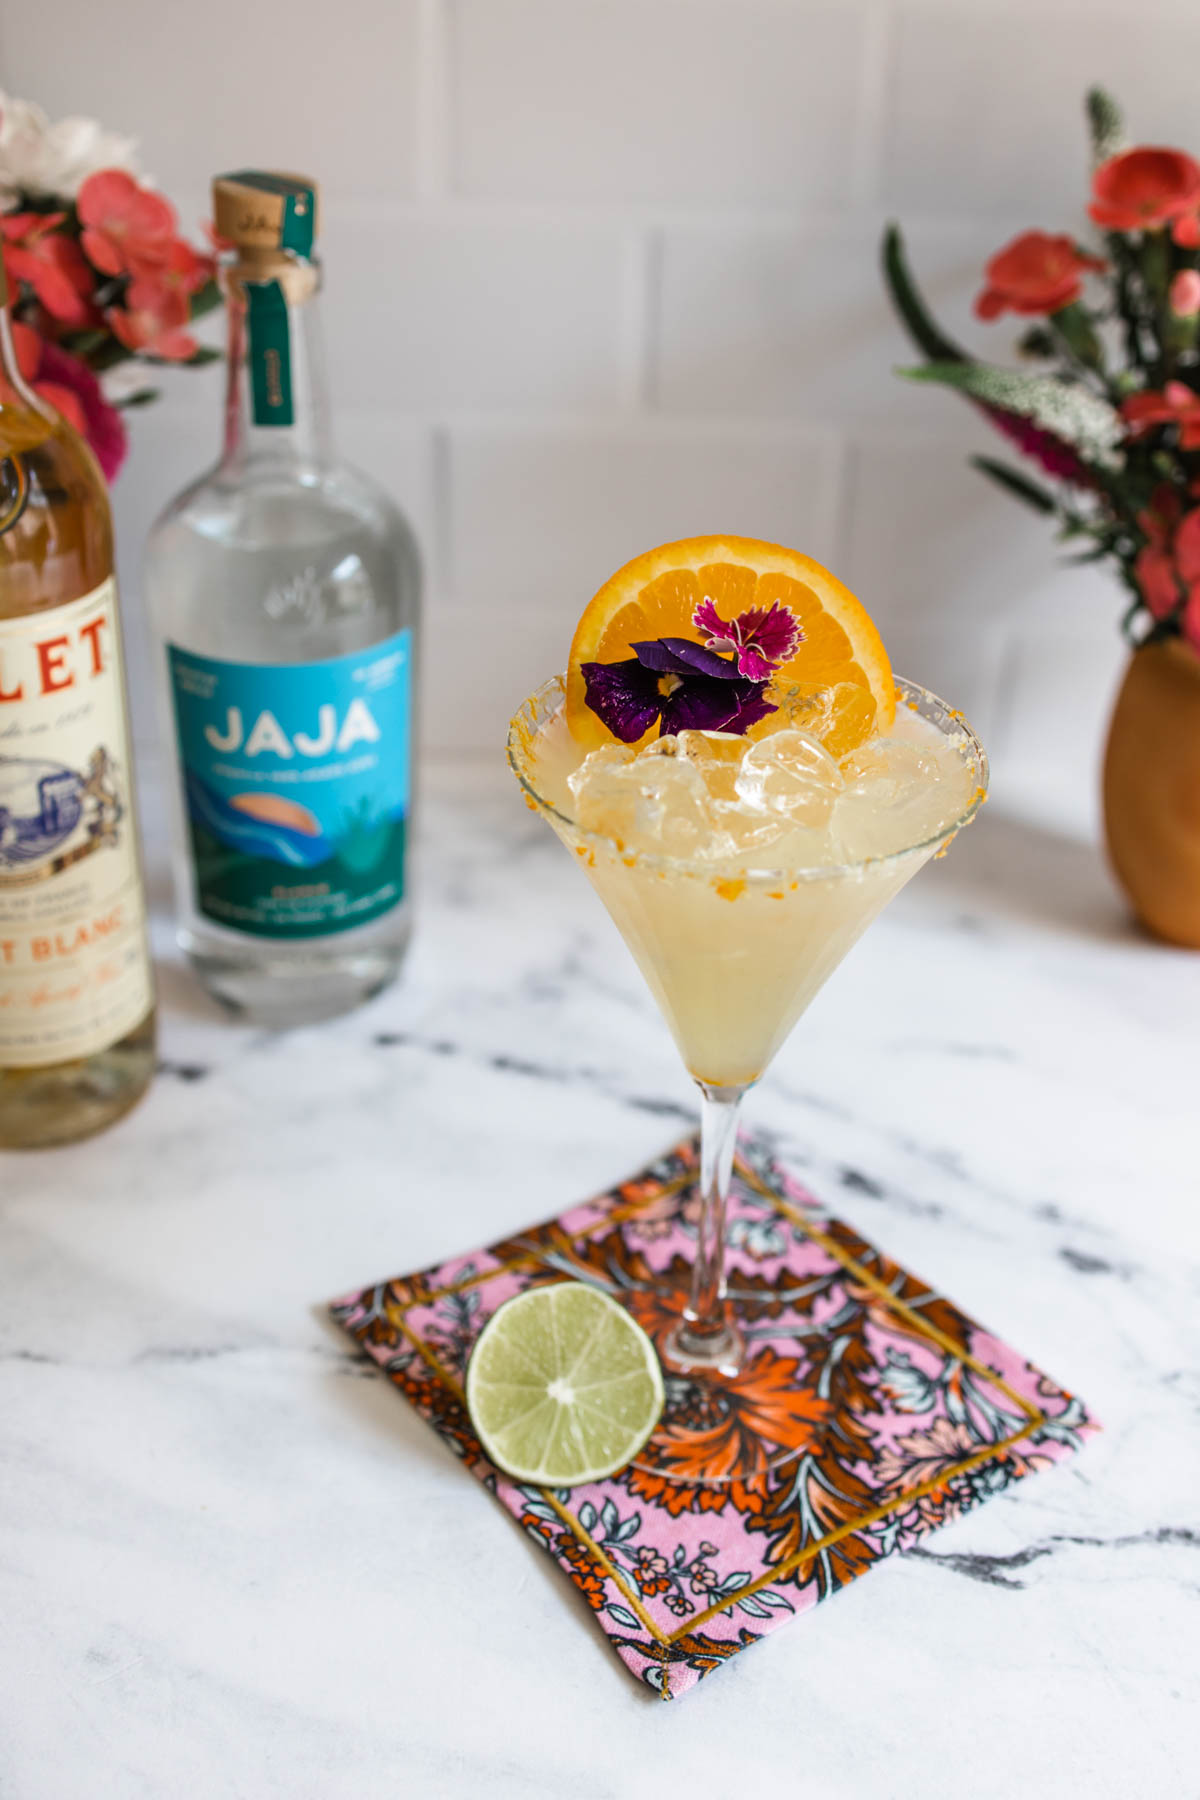 A Lillet Margarita in an orange salt-rimmed glass on top of a colorful napkin beside a slice of lime.